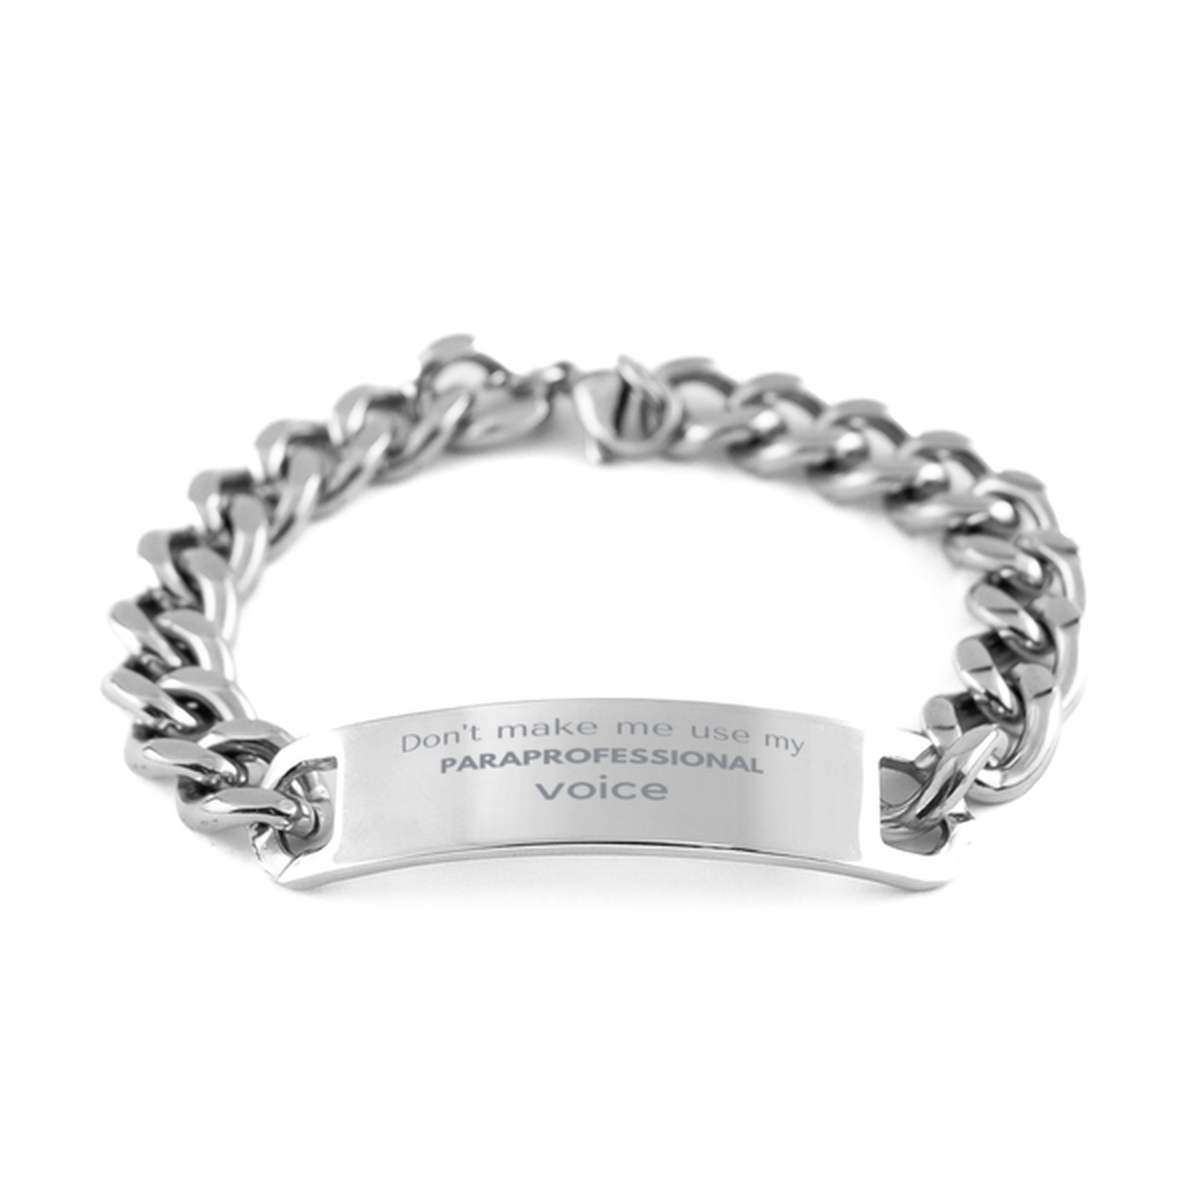 Don't make me use my Paraprofessional voice, Sarcasm Paraprofessional Gifts, Christmas Paraprofessional Cuban Chain Stainless Steel Bracelet Birthday Unique Gifts For Paraprofessional Coworkers, Men, Women, Colleague, Friends